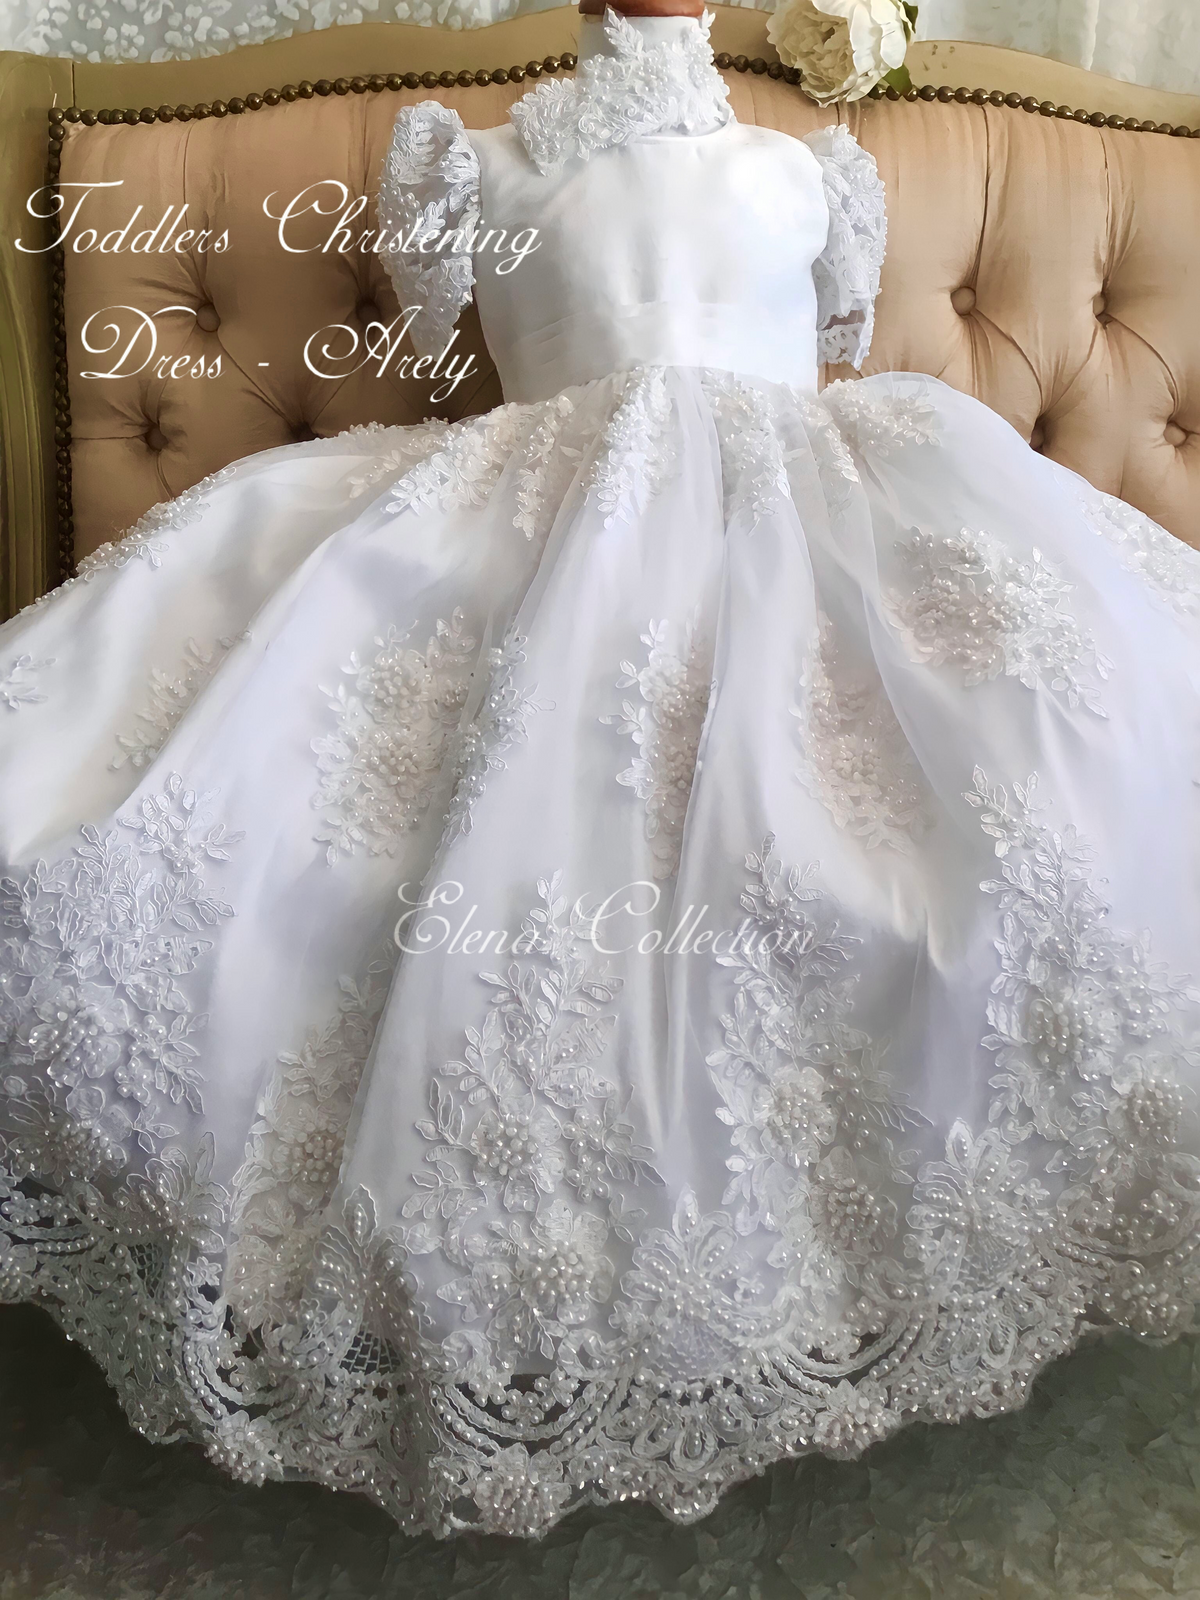 Christening Dress - Arely